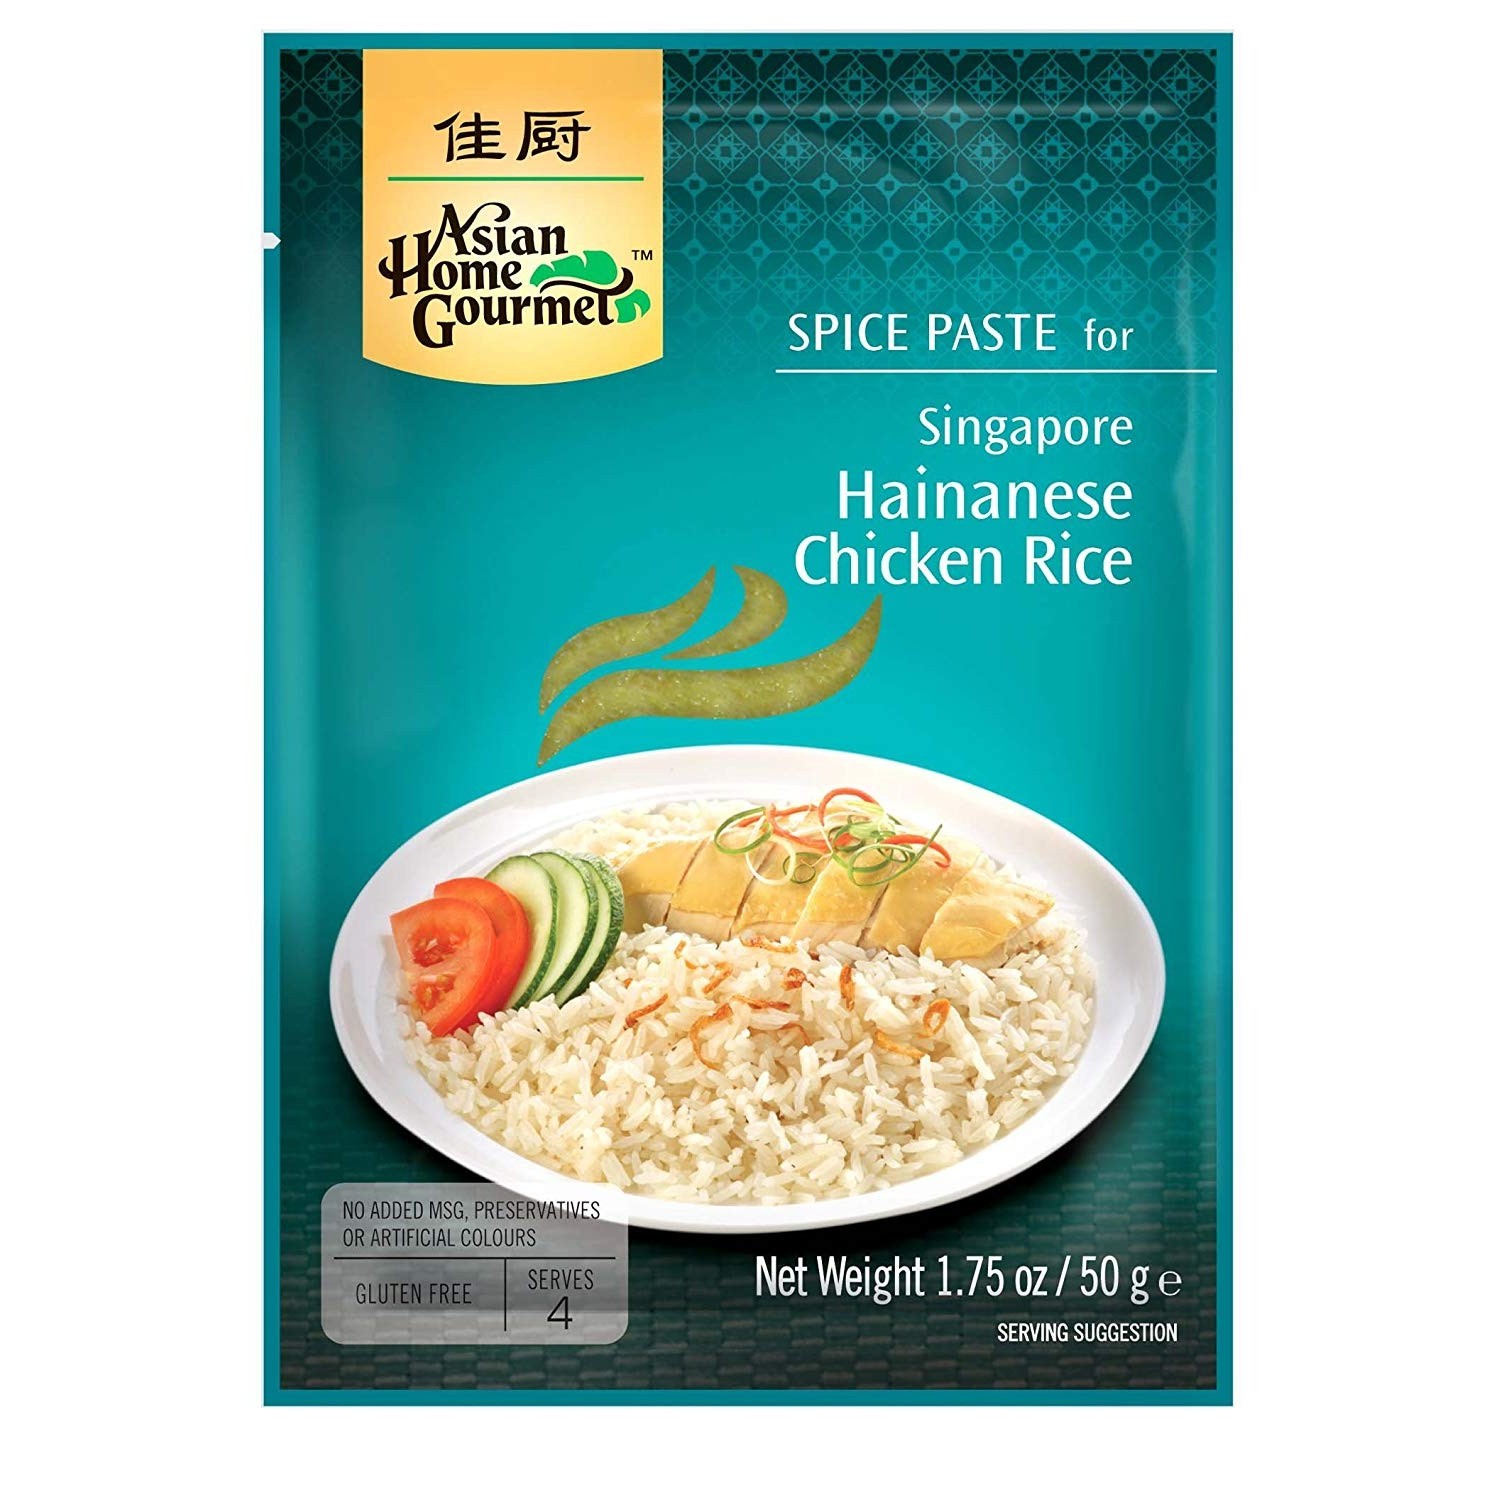 Asian Home Gourmet 50g Spice Paste for Singapore Hainanese Chicken Rice